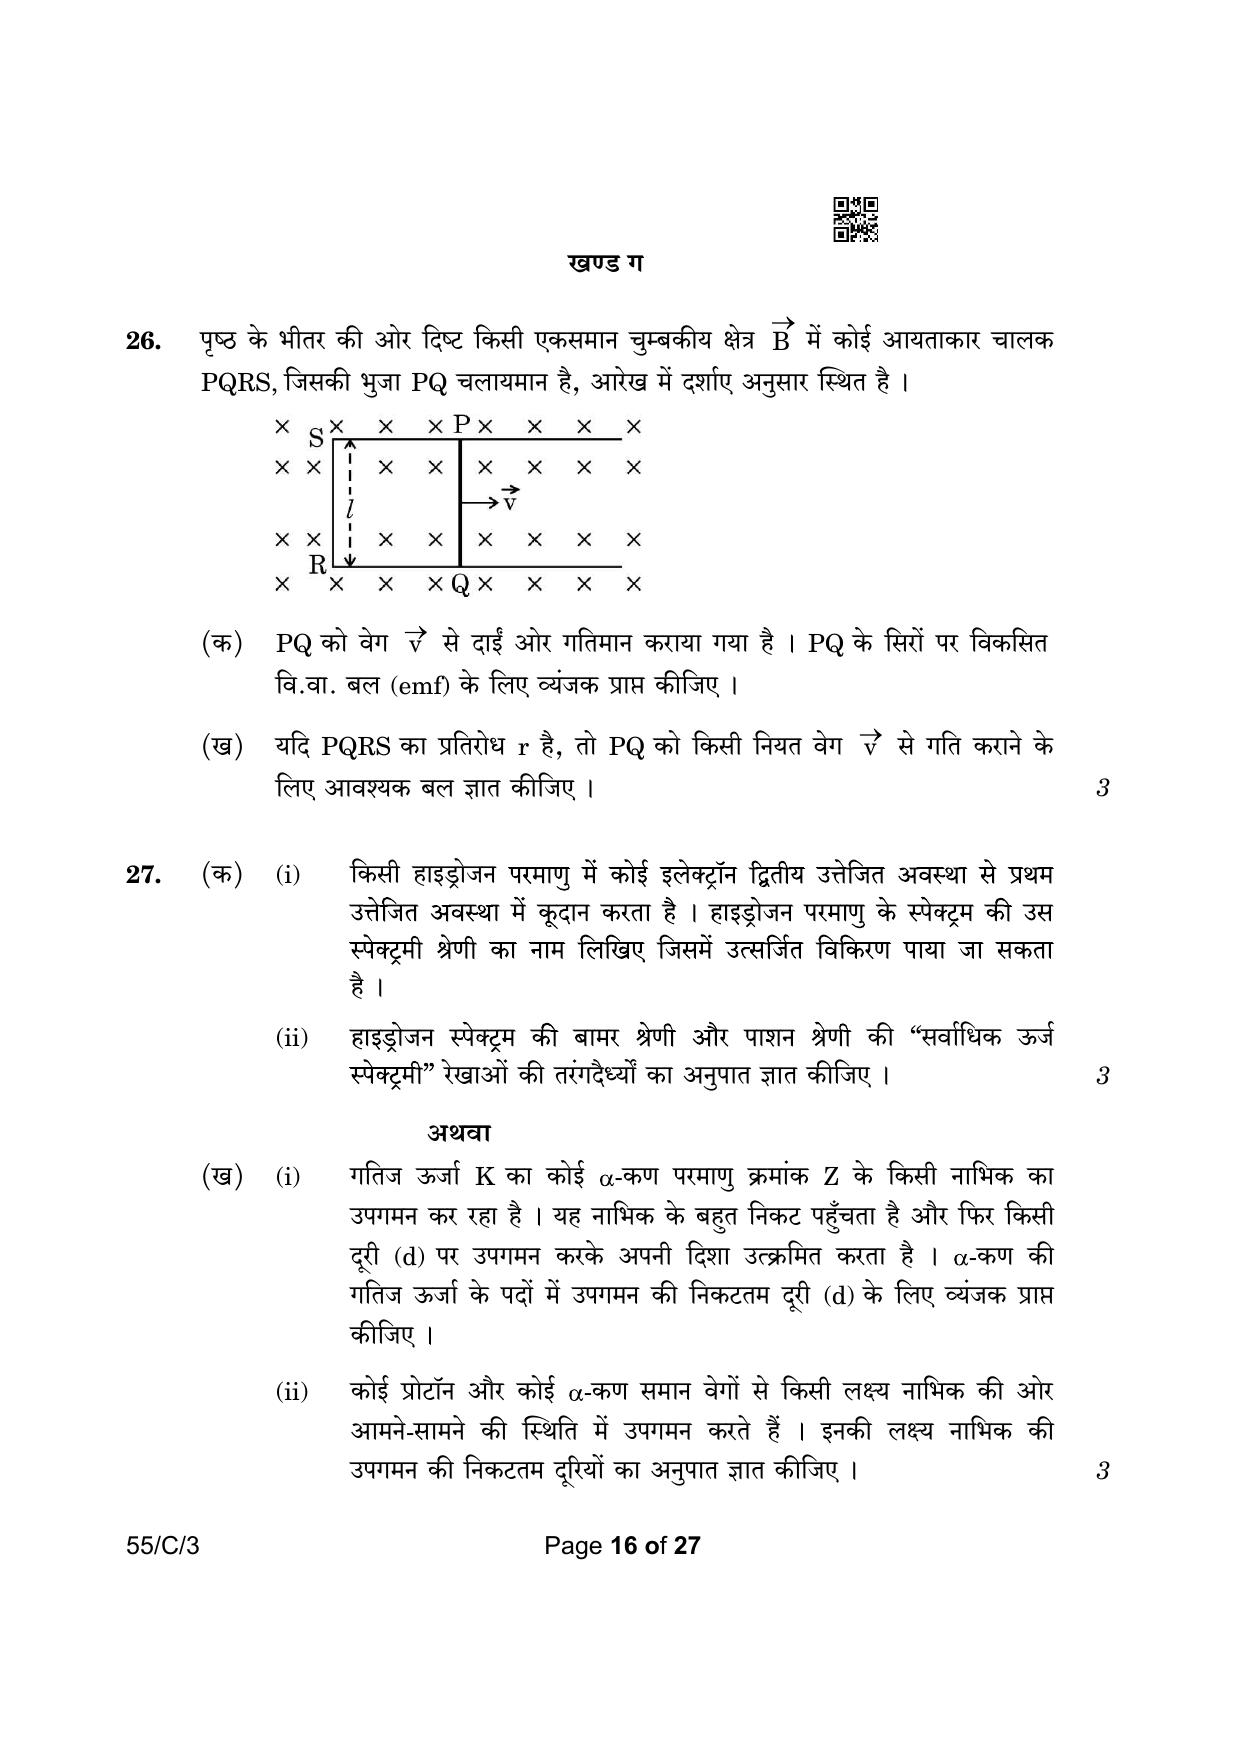 CBSE Class 12 55-3 Physics 2023 (Compartment) Question Paper - Page 16